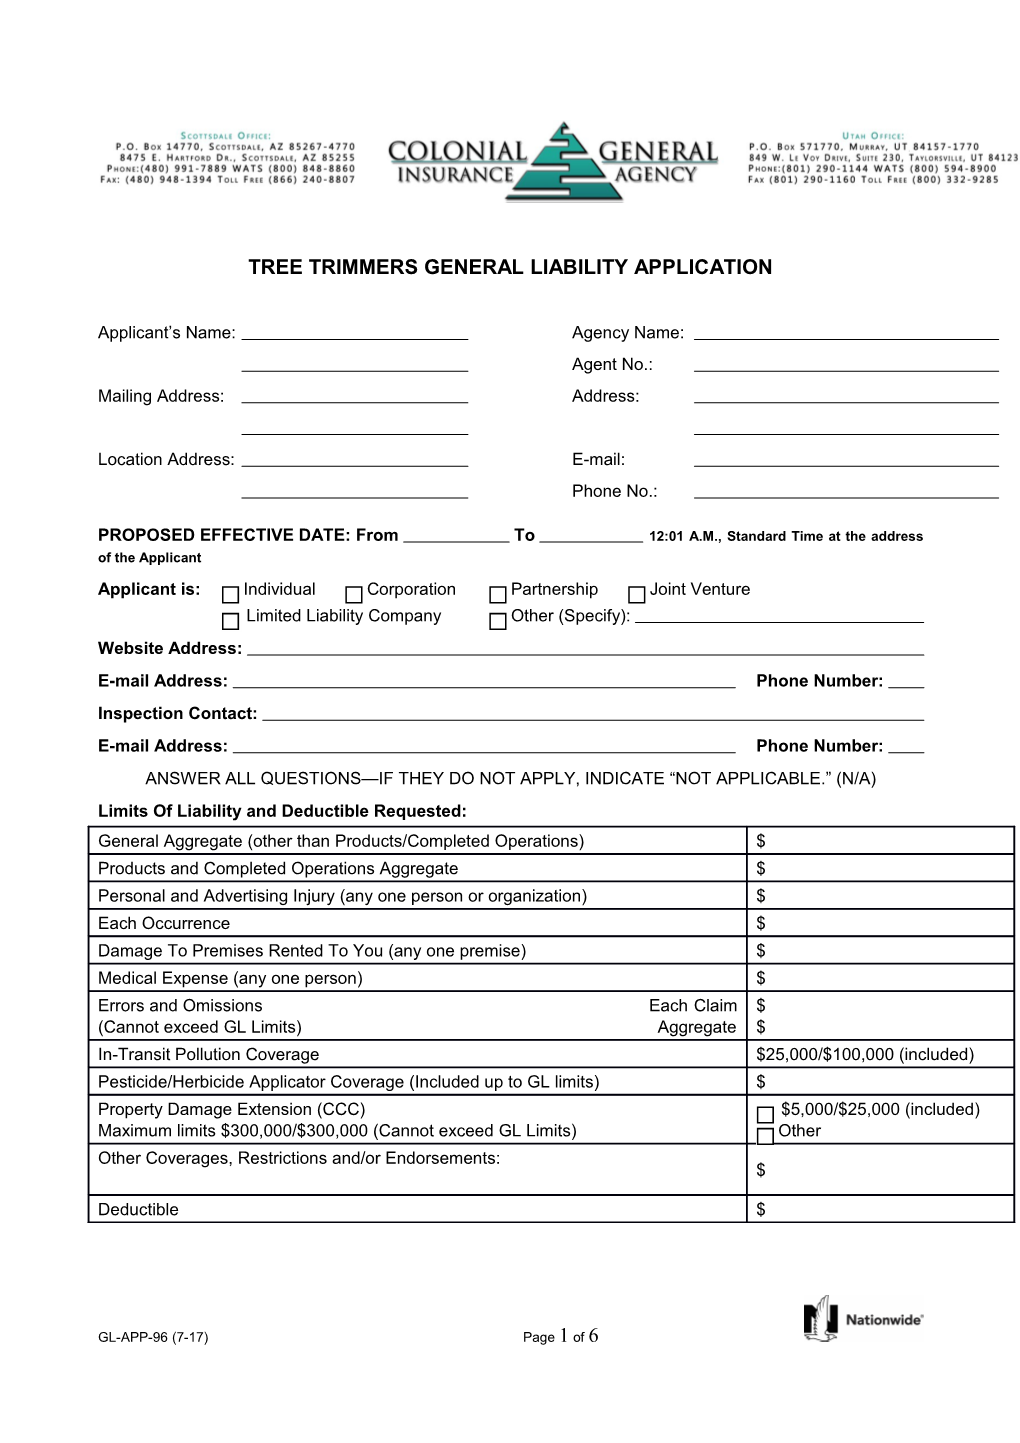 Tree Trimmers General Liability Application